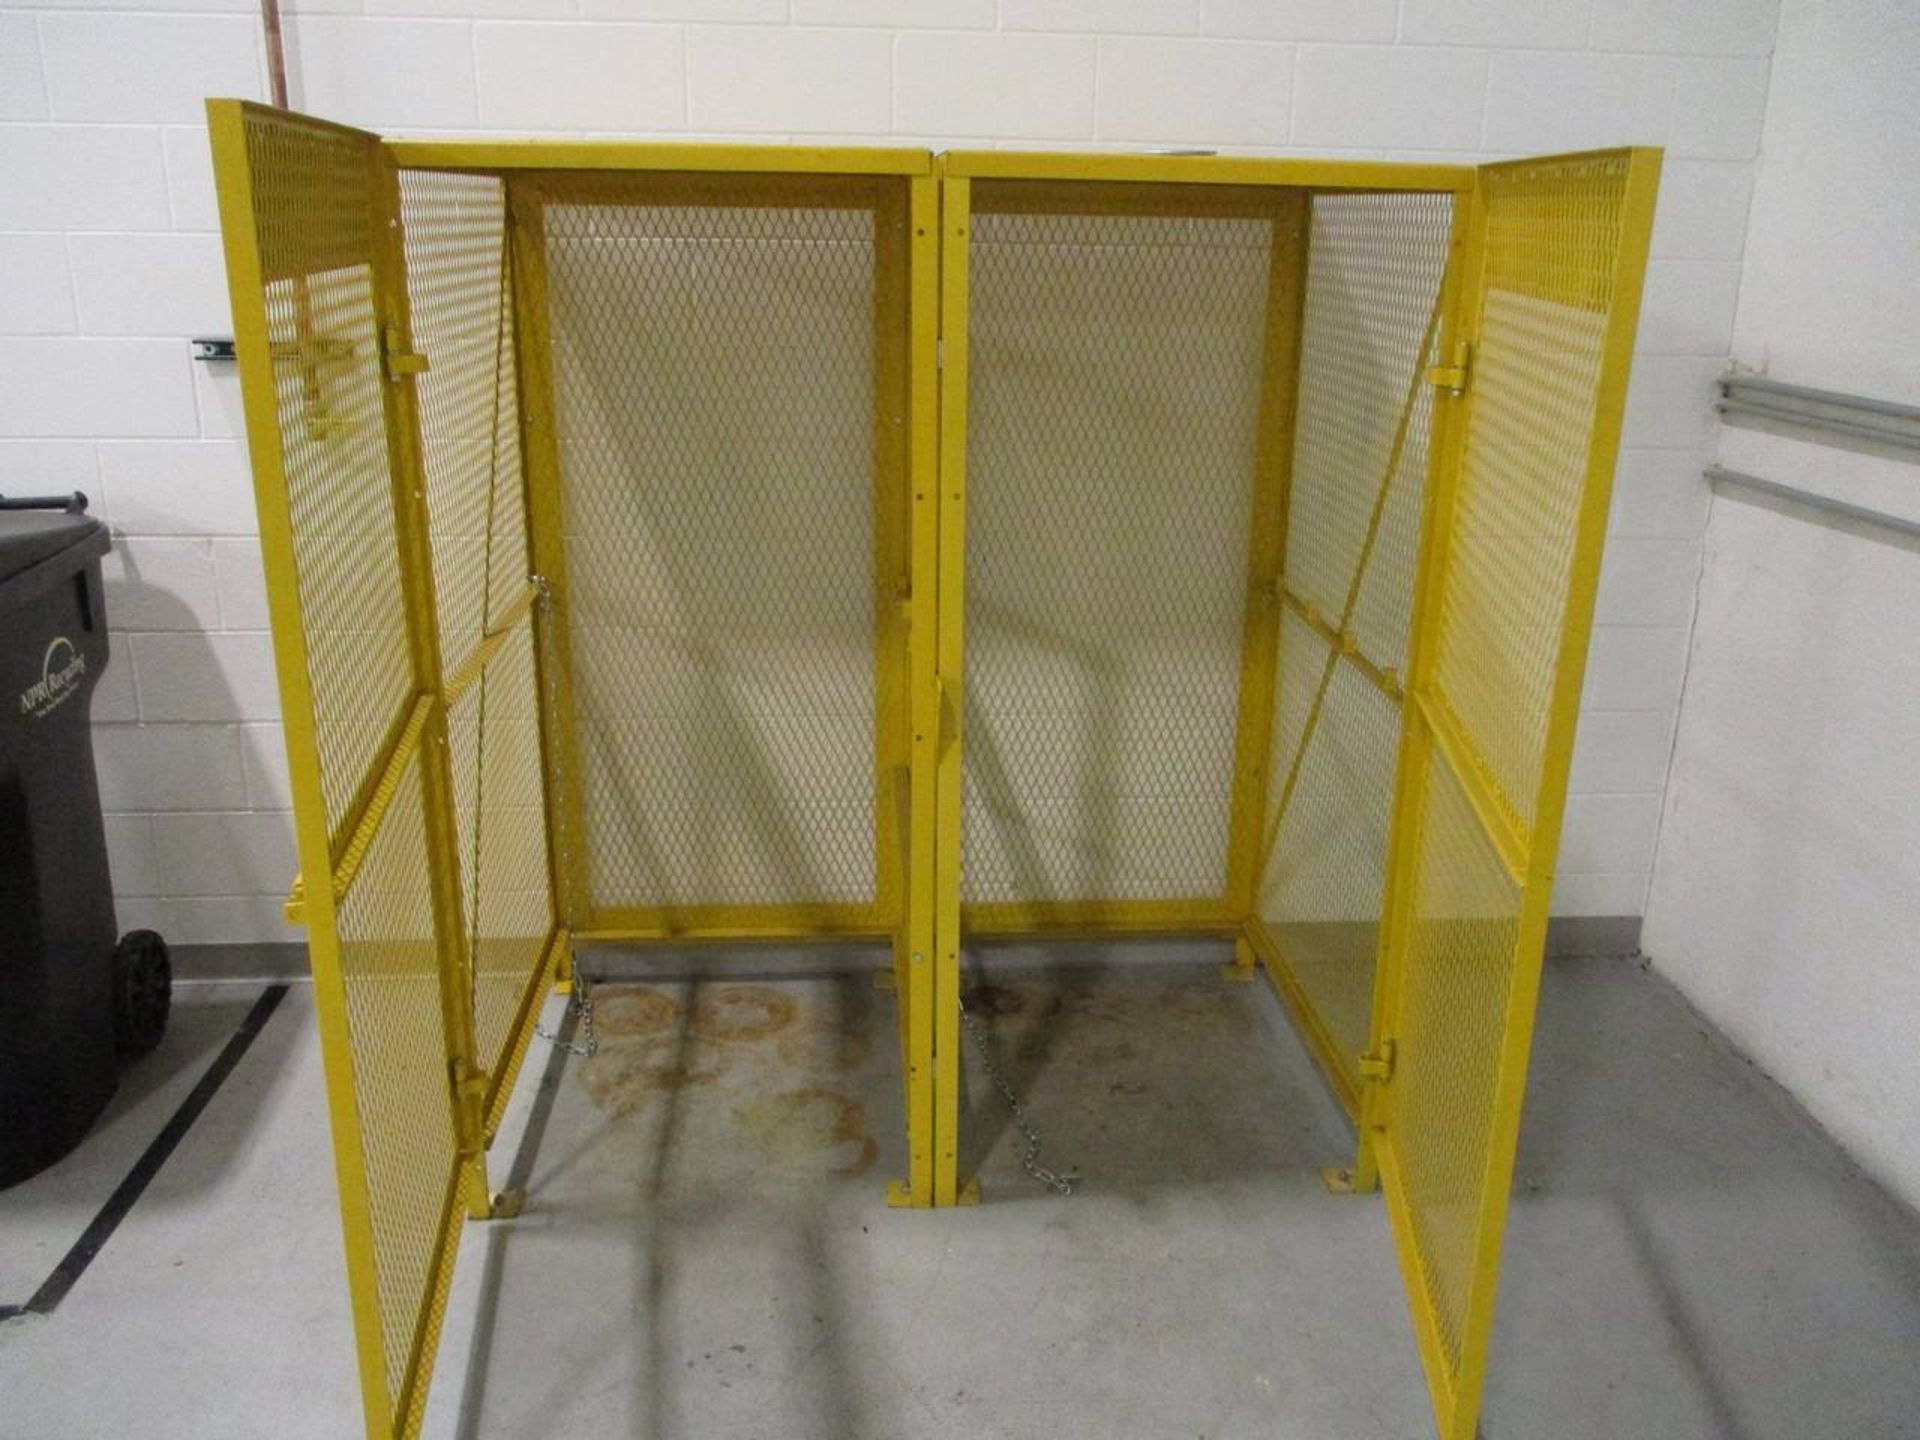 Modern Equipment Co CSC2V-KD Expanded Metal Storage Cage - Image 3 of 4